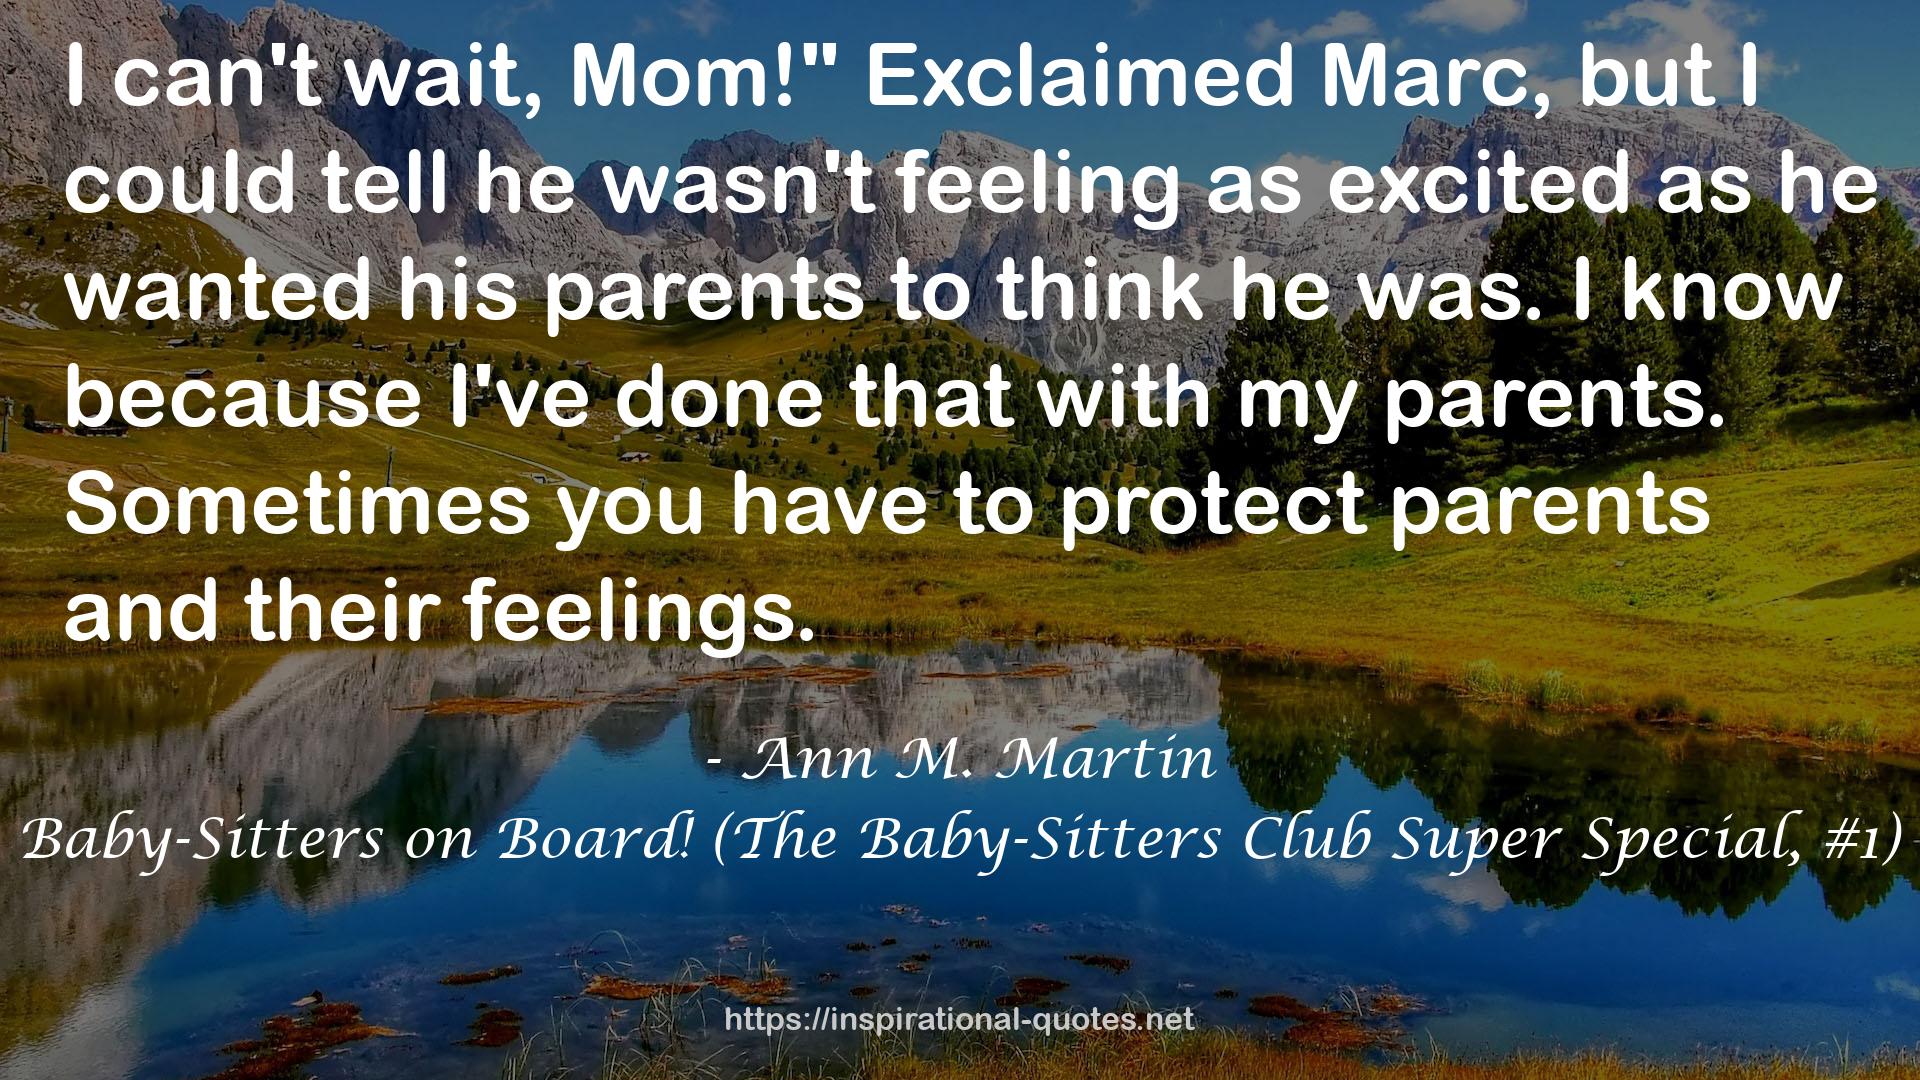 Baby-Sitters on Board! (The Baby-Sitters Club Super Special, #1) QUOTES